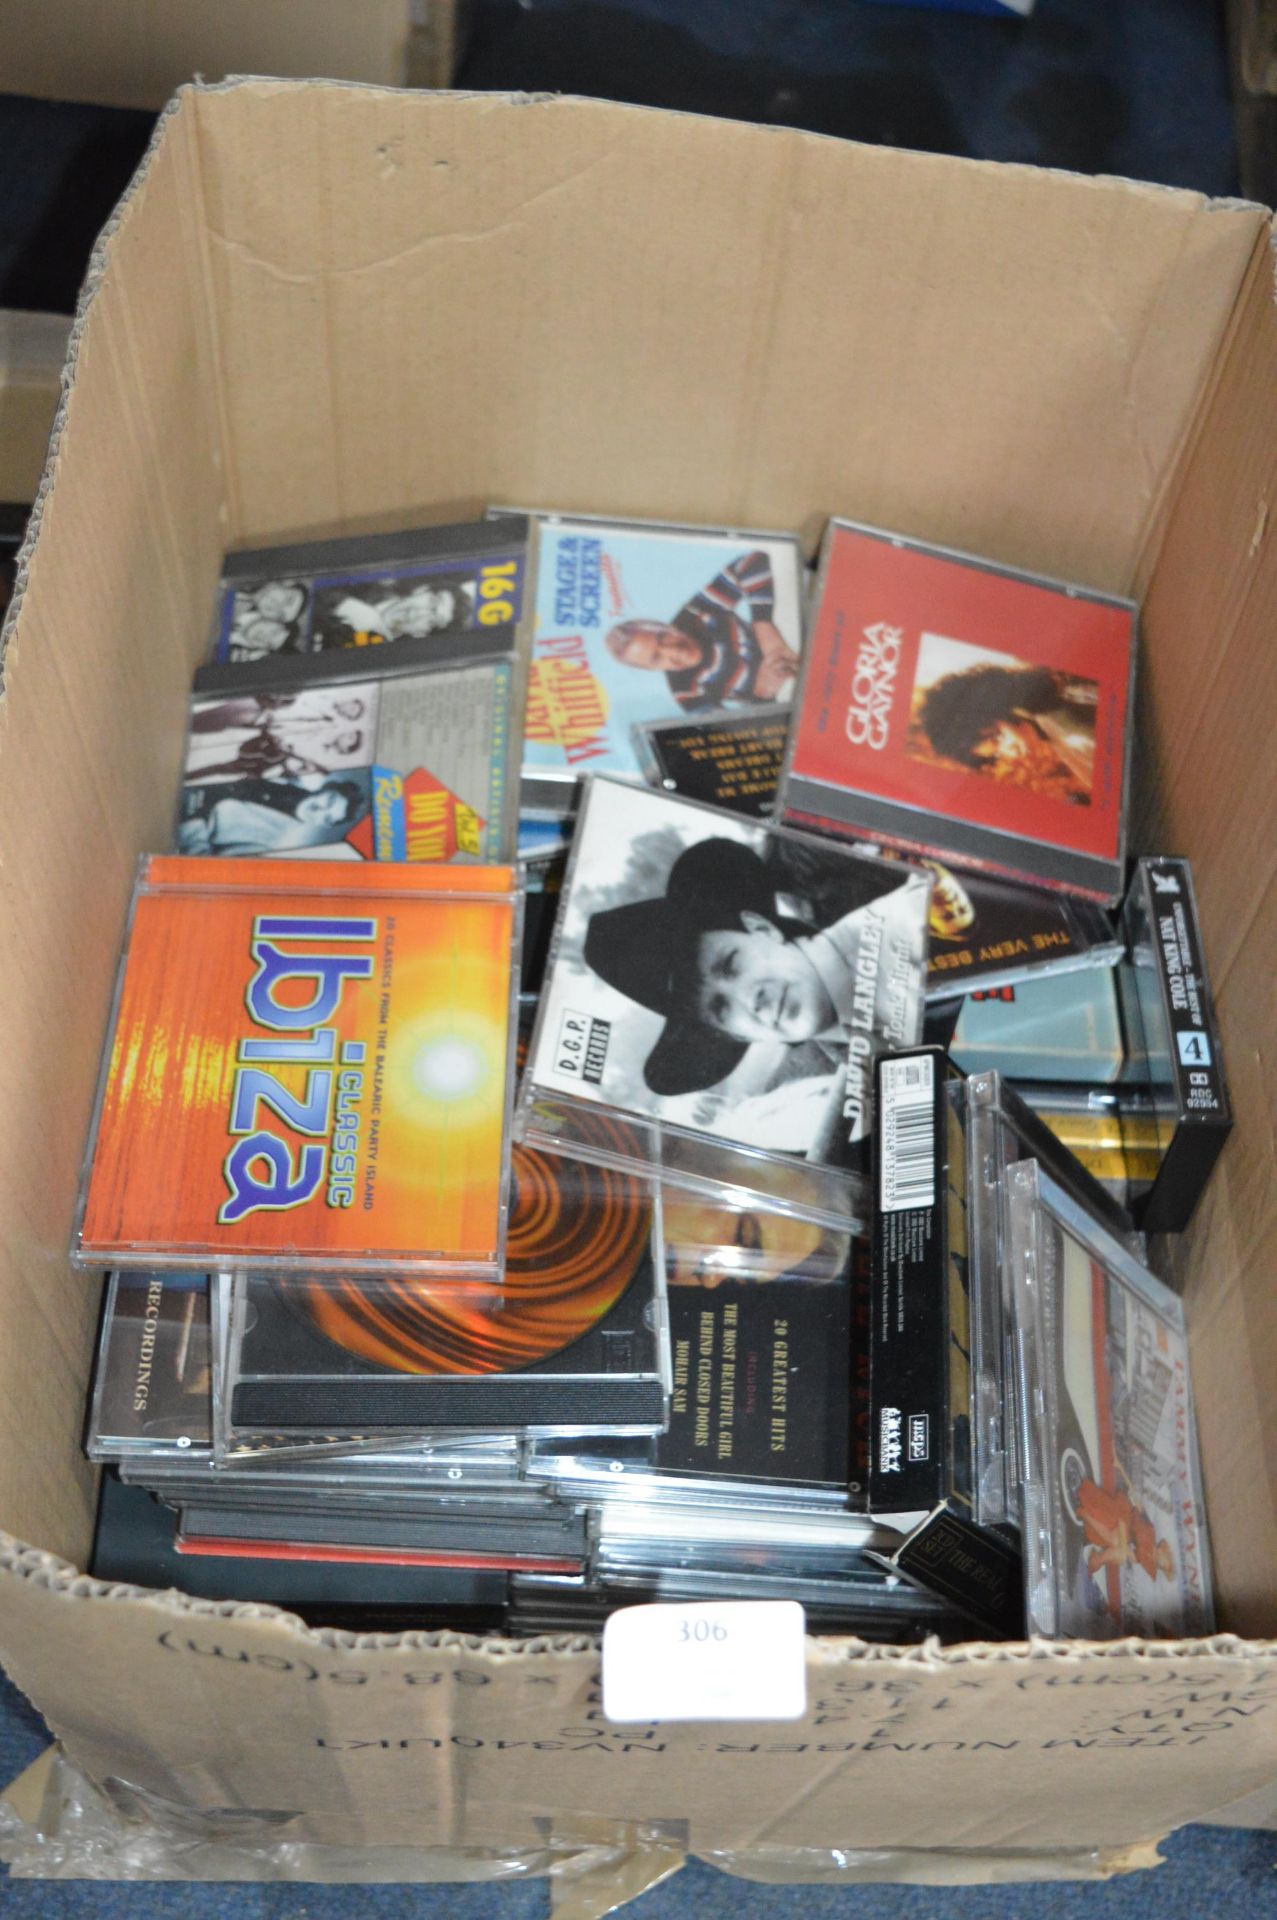 CDs and Cassette Tapes